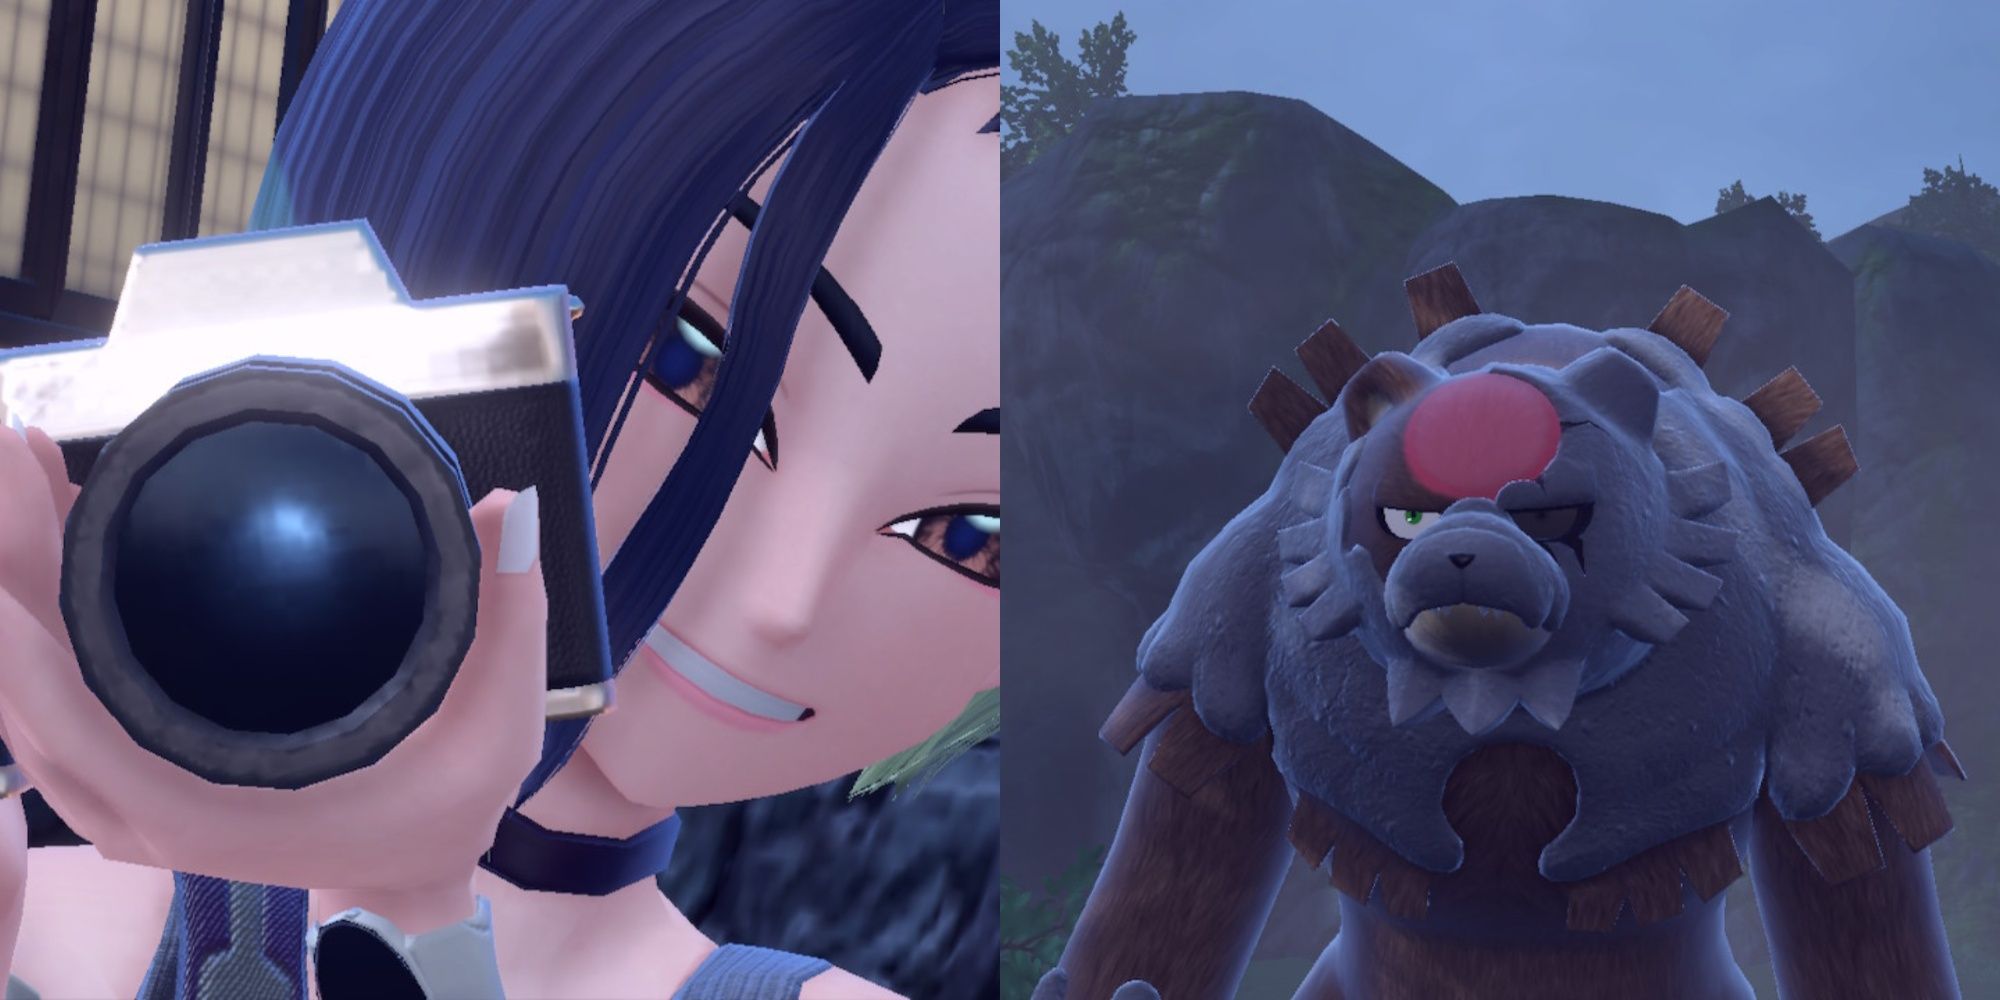 Collage image of Perrin holding a camera and smiling, and Bloodmoon Ursaluna in Pokemon Scarlet & Violet: The Teal Mask.